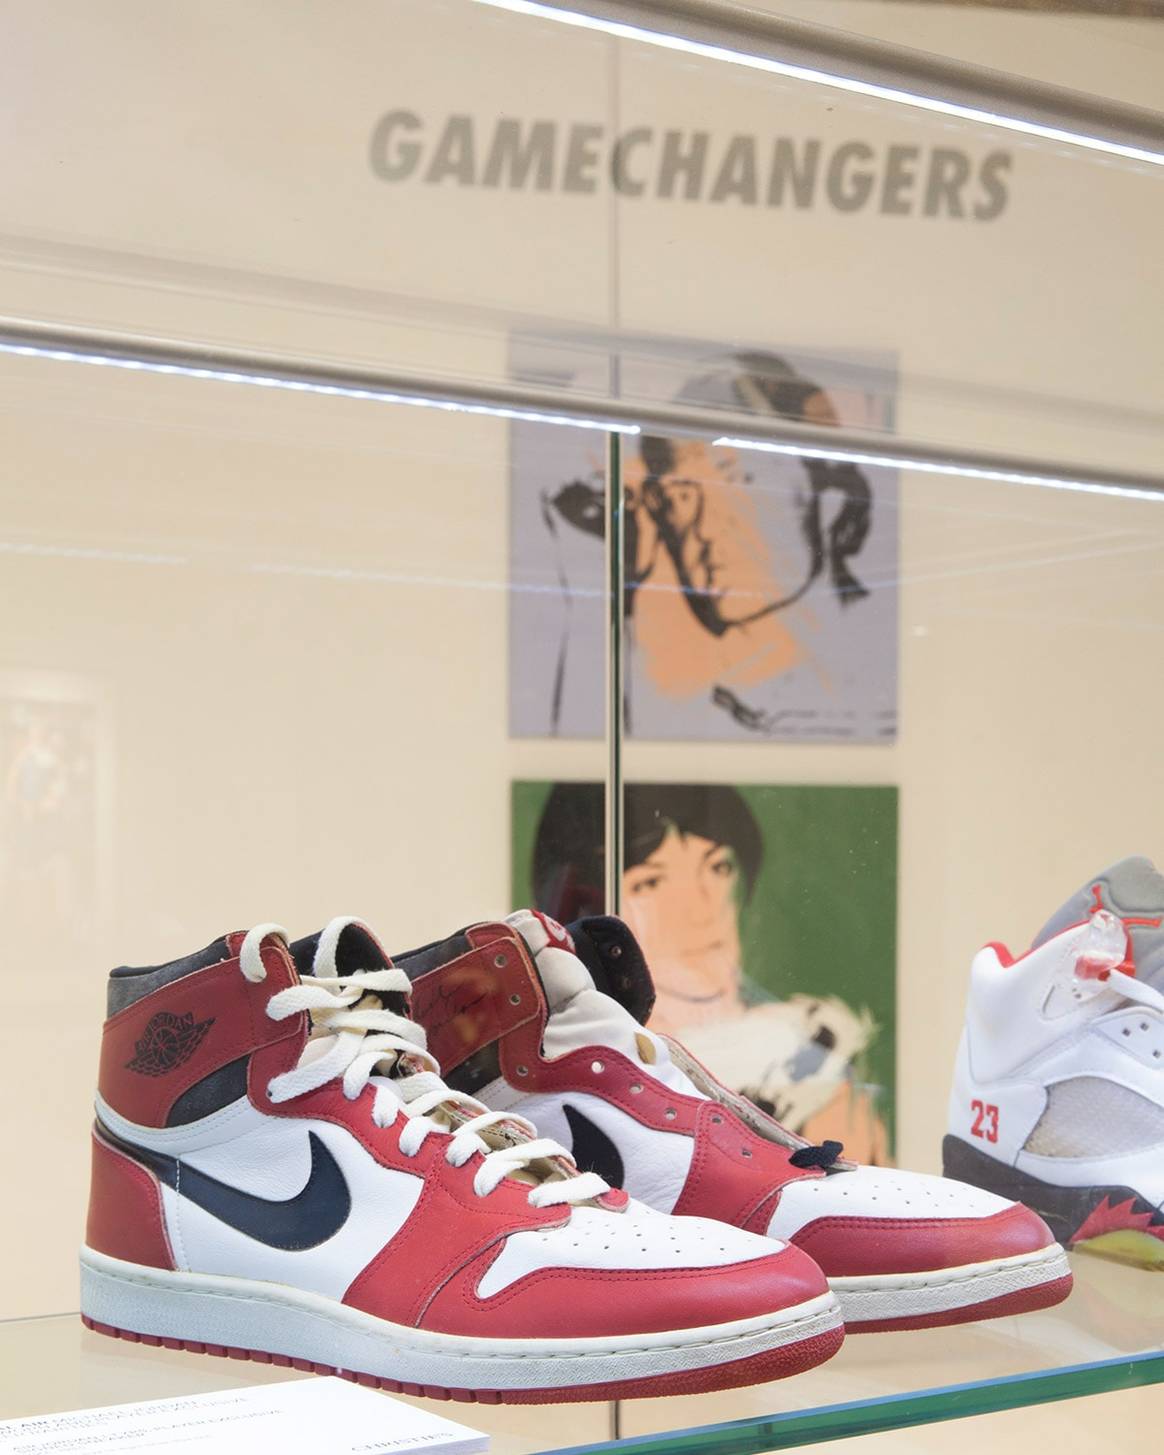 Christie’s marks new benchmark for sneakers at auction